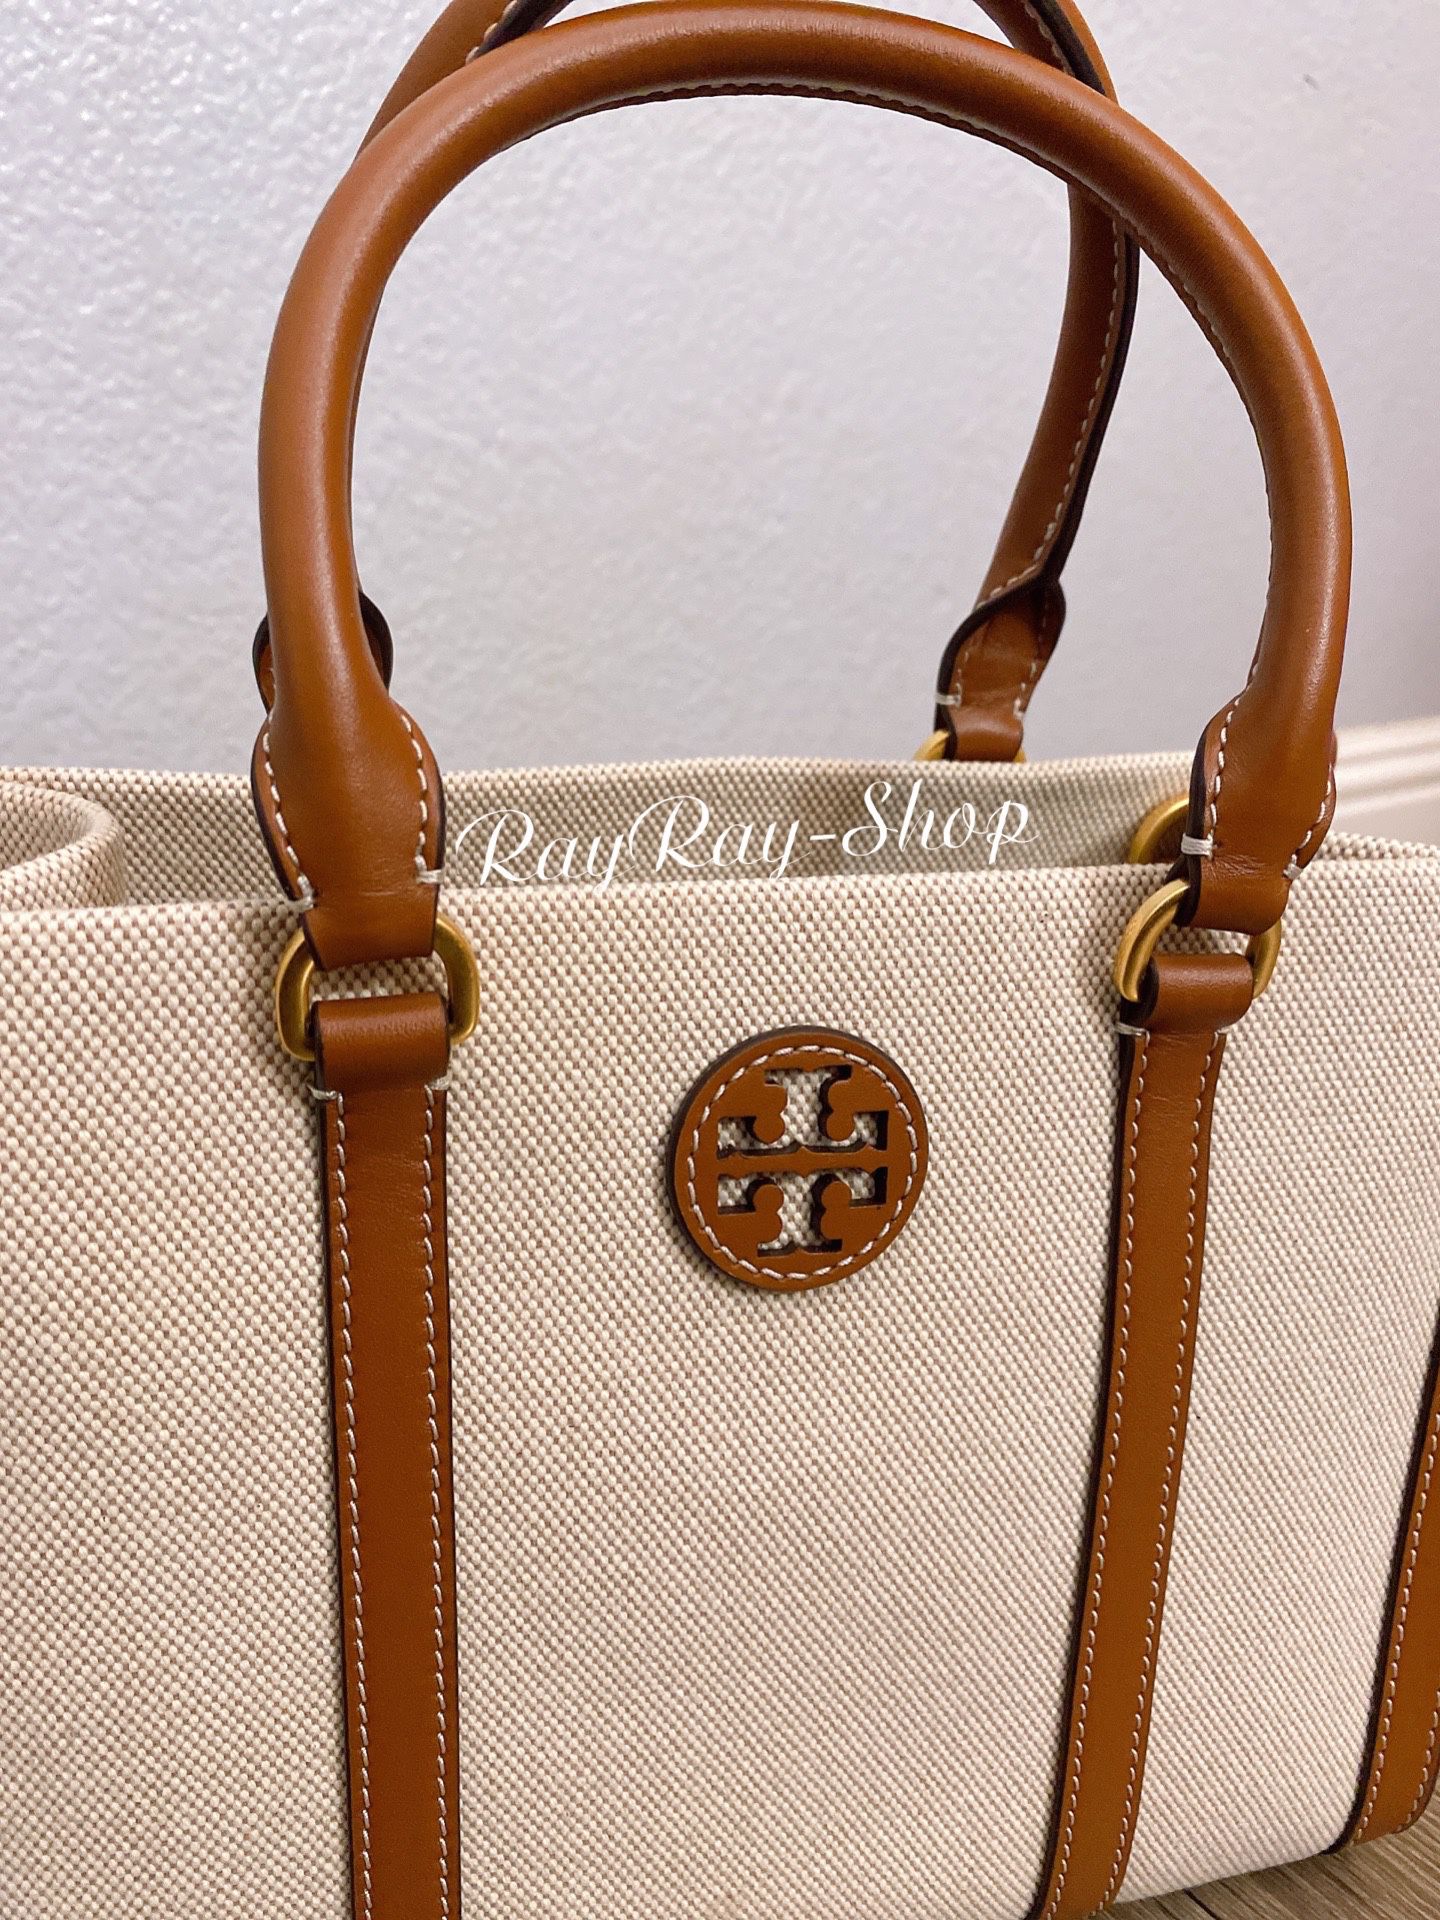 NWT Tory Burch Blake Canvas Small Tote NATURAL/CLASSIC